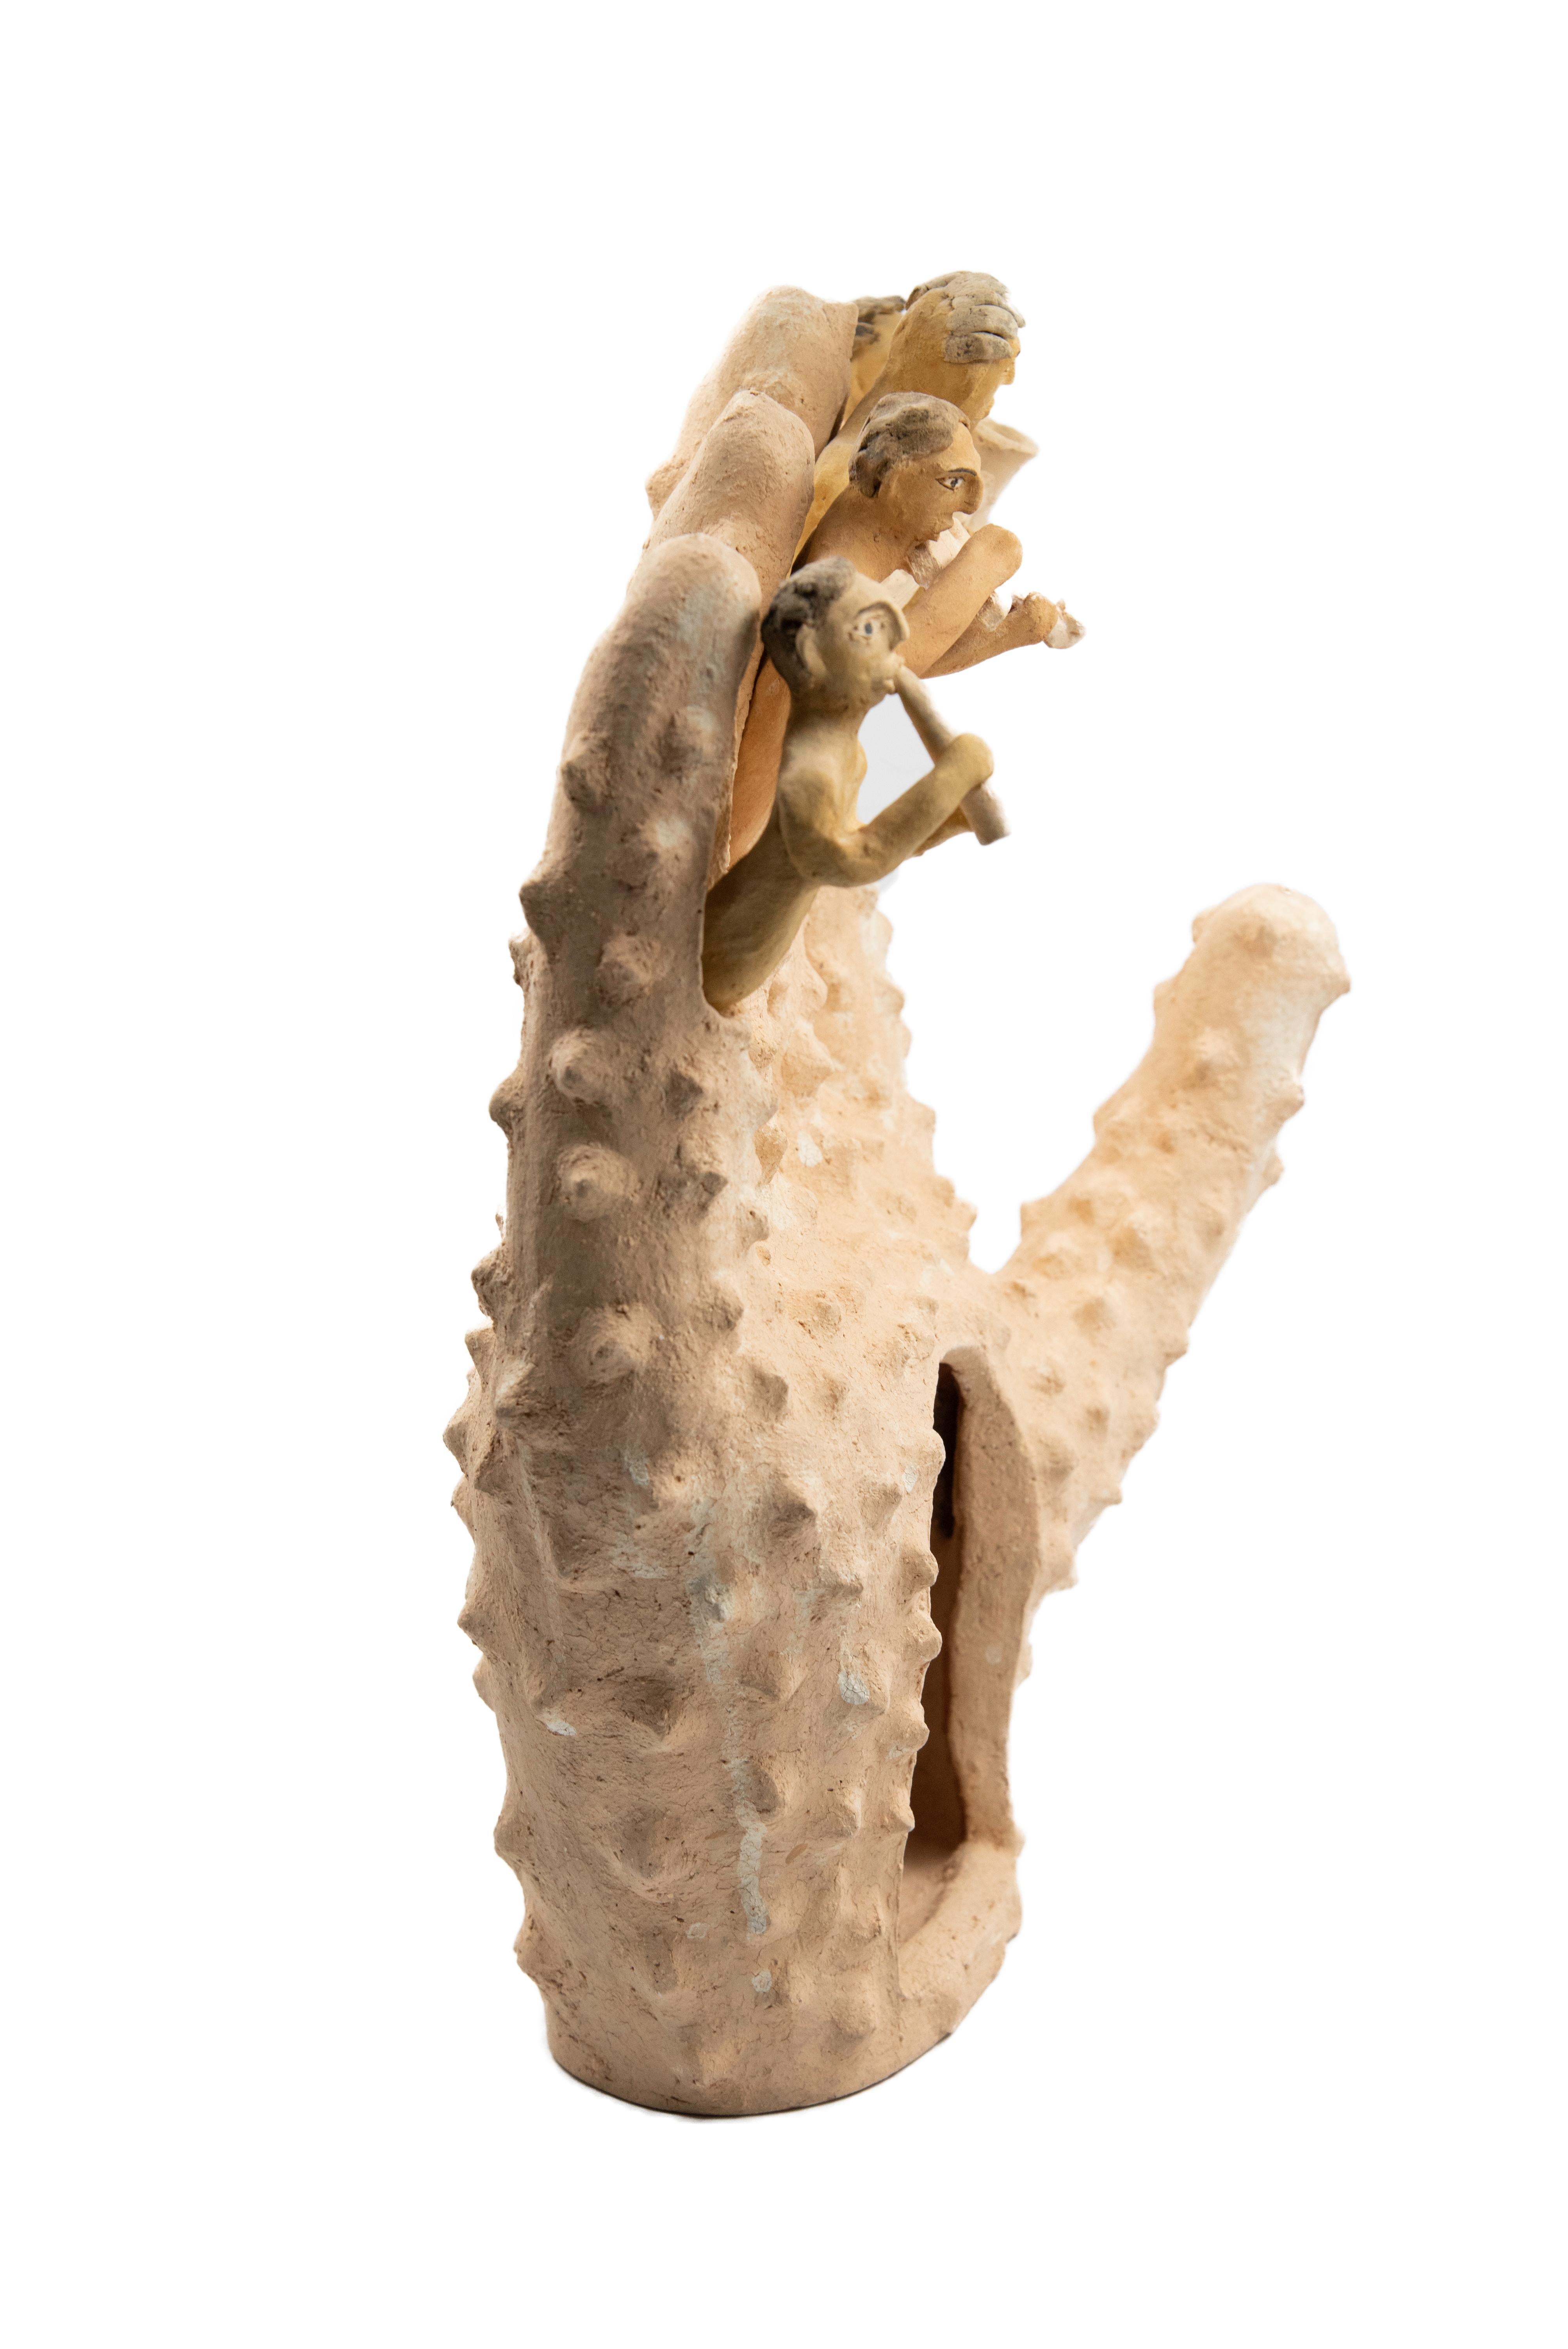 This Mexican ceramic clay hand sculpture is a piece by artist Manuel Reyes. Made with clay from Oaxaca and Zacatecas, painted with oxides from the region. Done with the hand-modeled technique and cooked in traditional wood-fired oven. 

Inspired